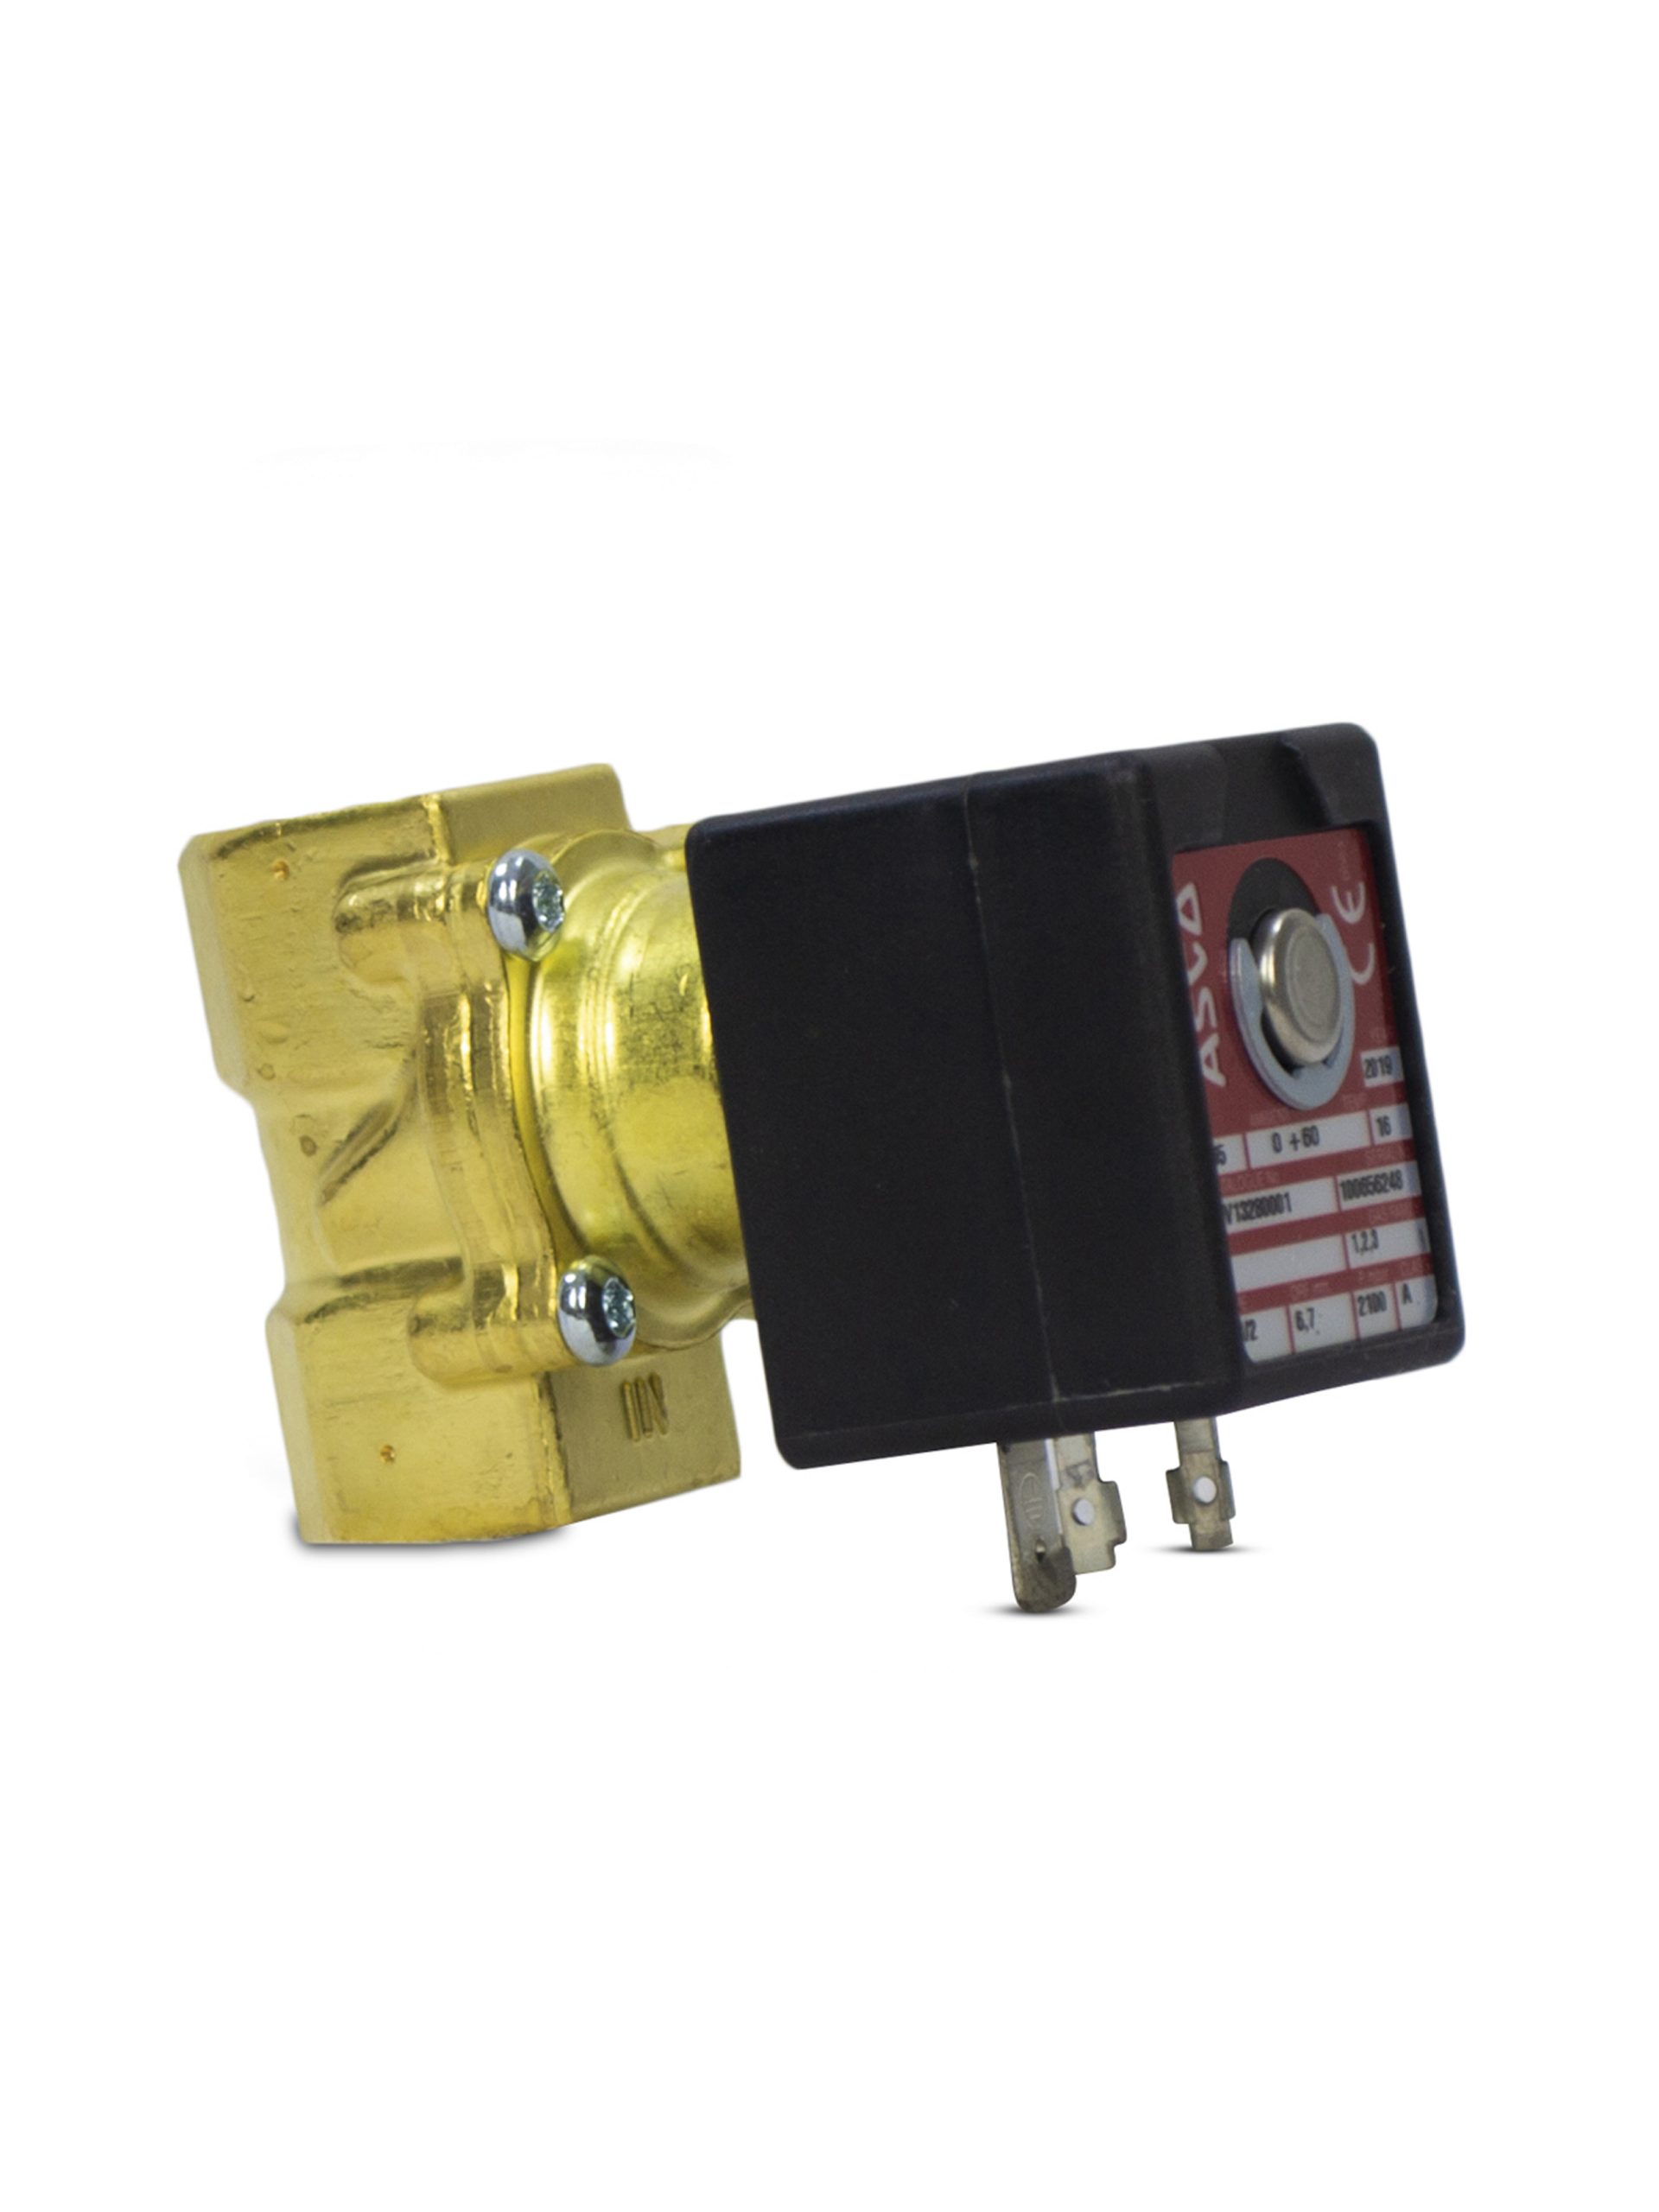 SOLENOID VALVE 1/2 Inches  240V AC BRASS BODY 2100 MBAR